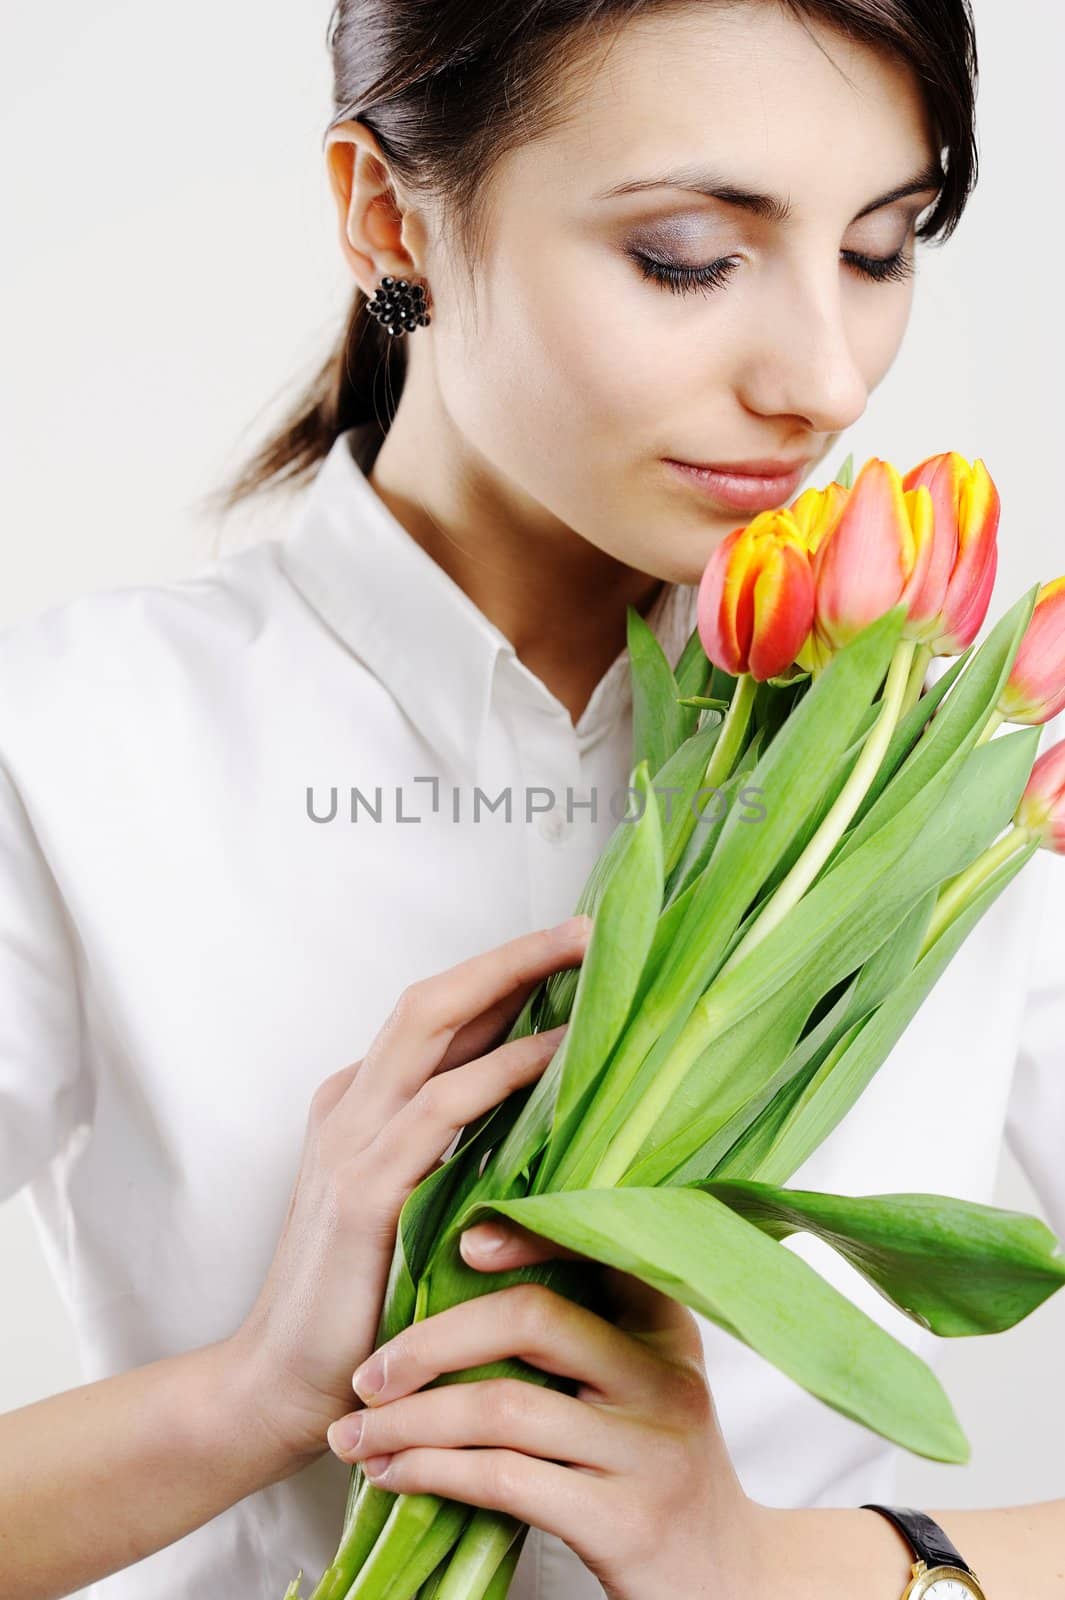 An image of young girl with fresh tulips